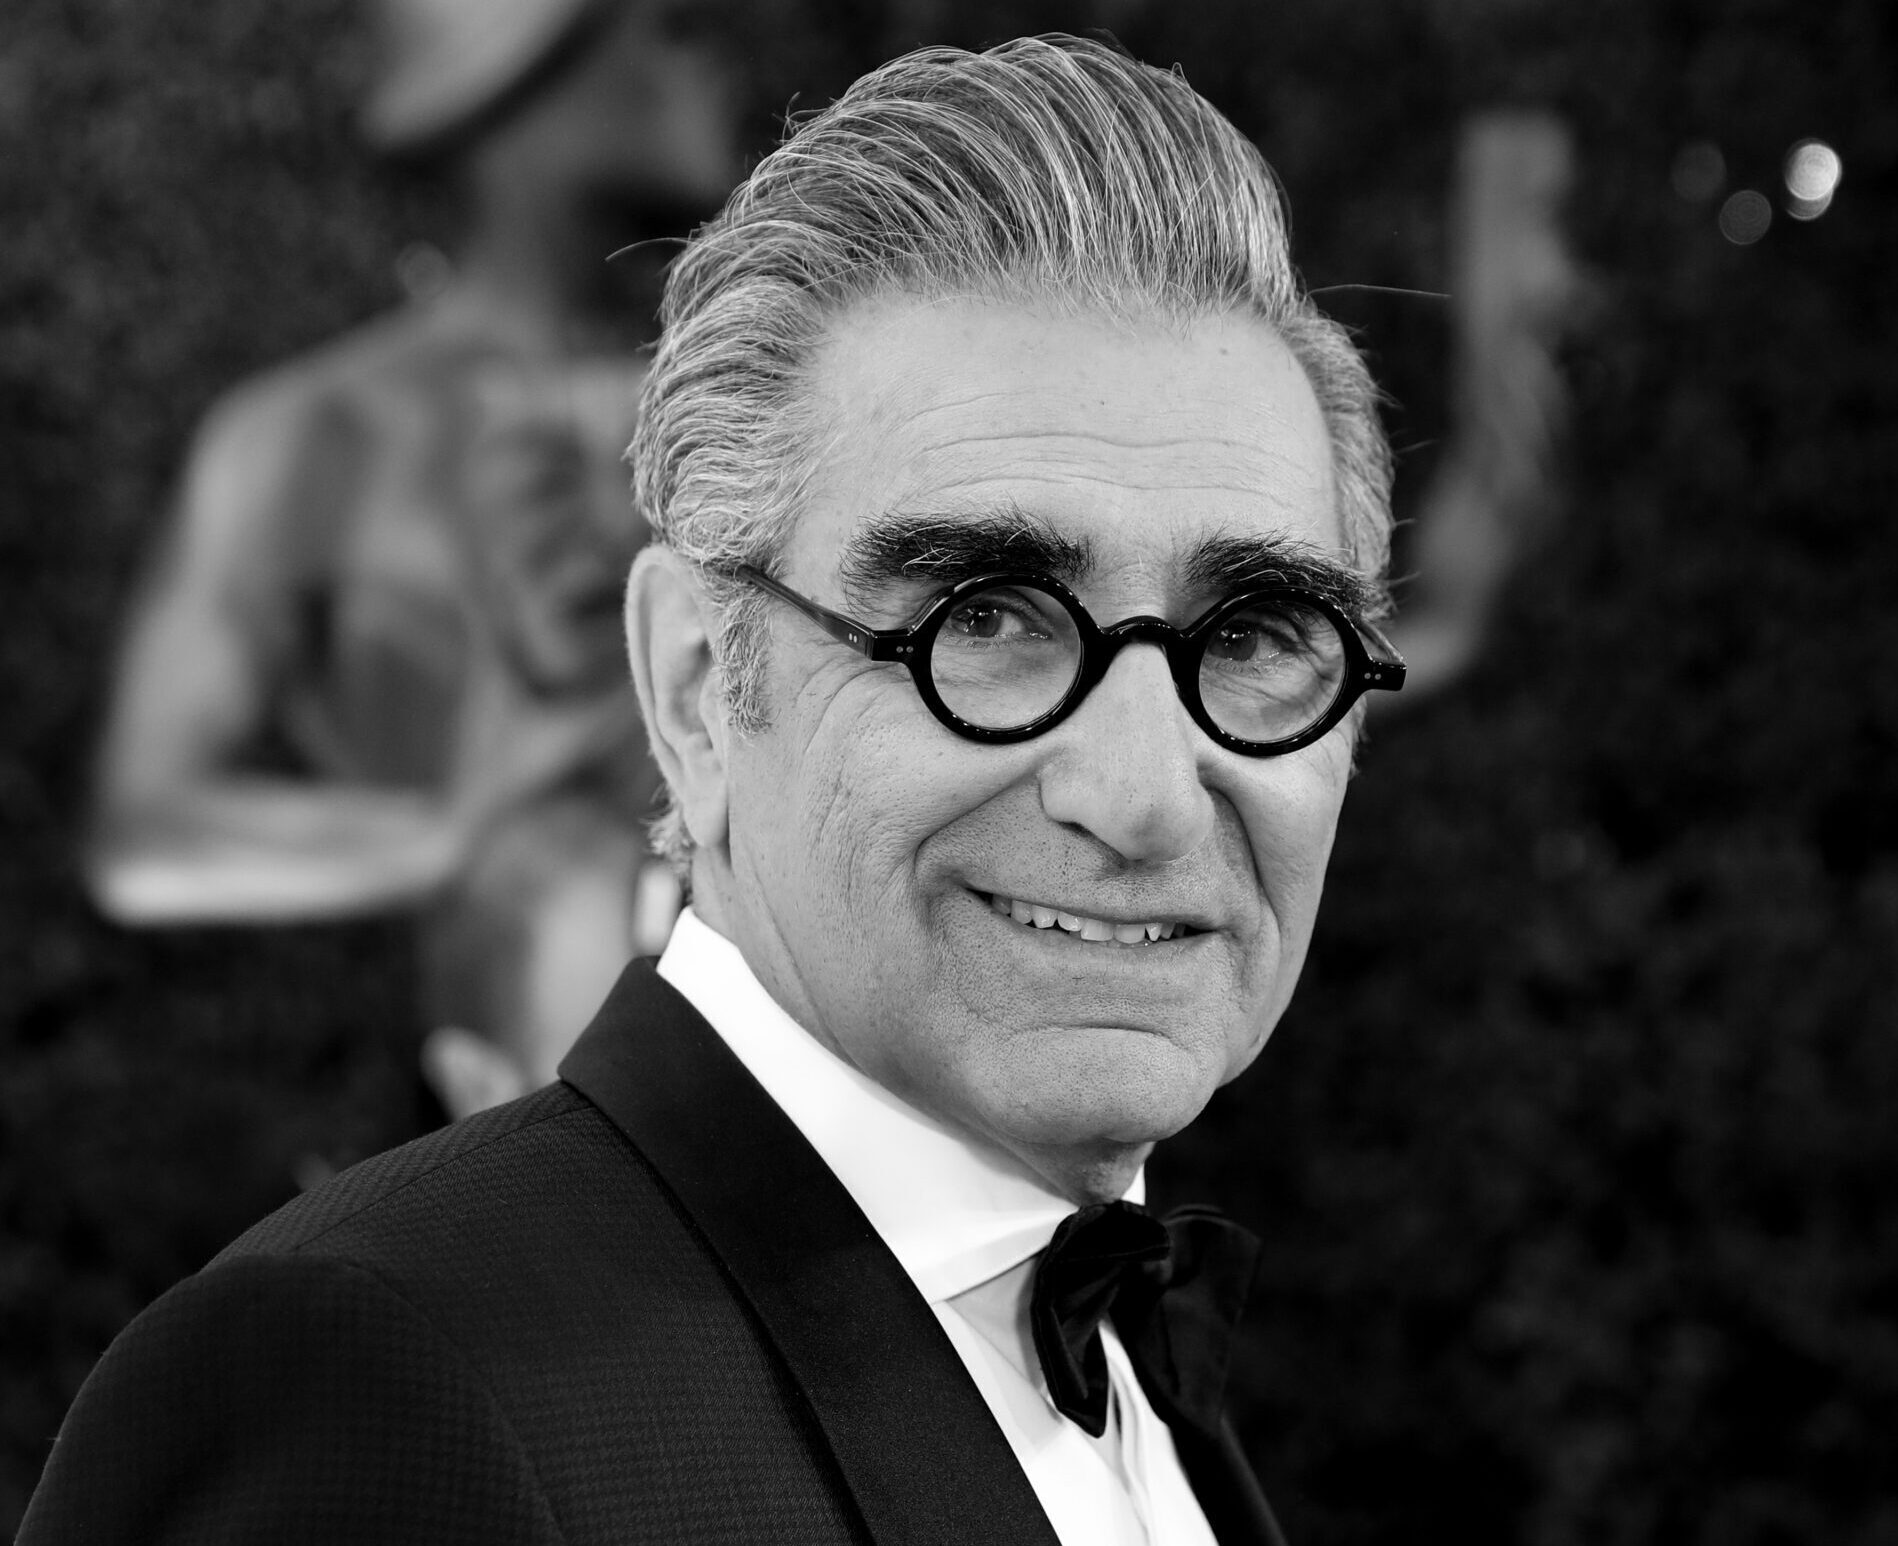 Interview with Eugene Levy